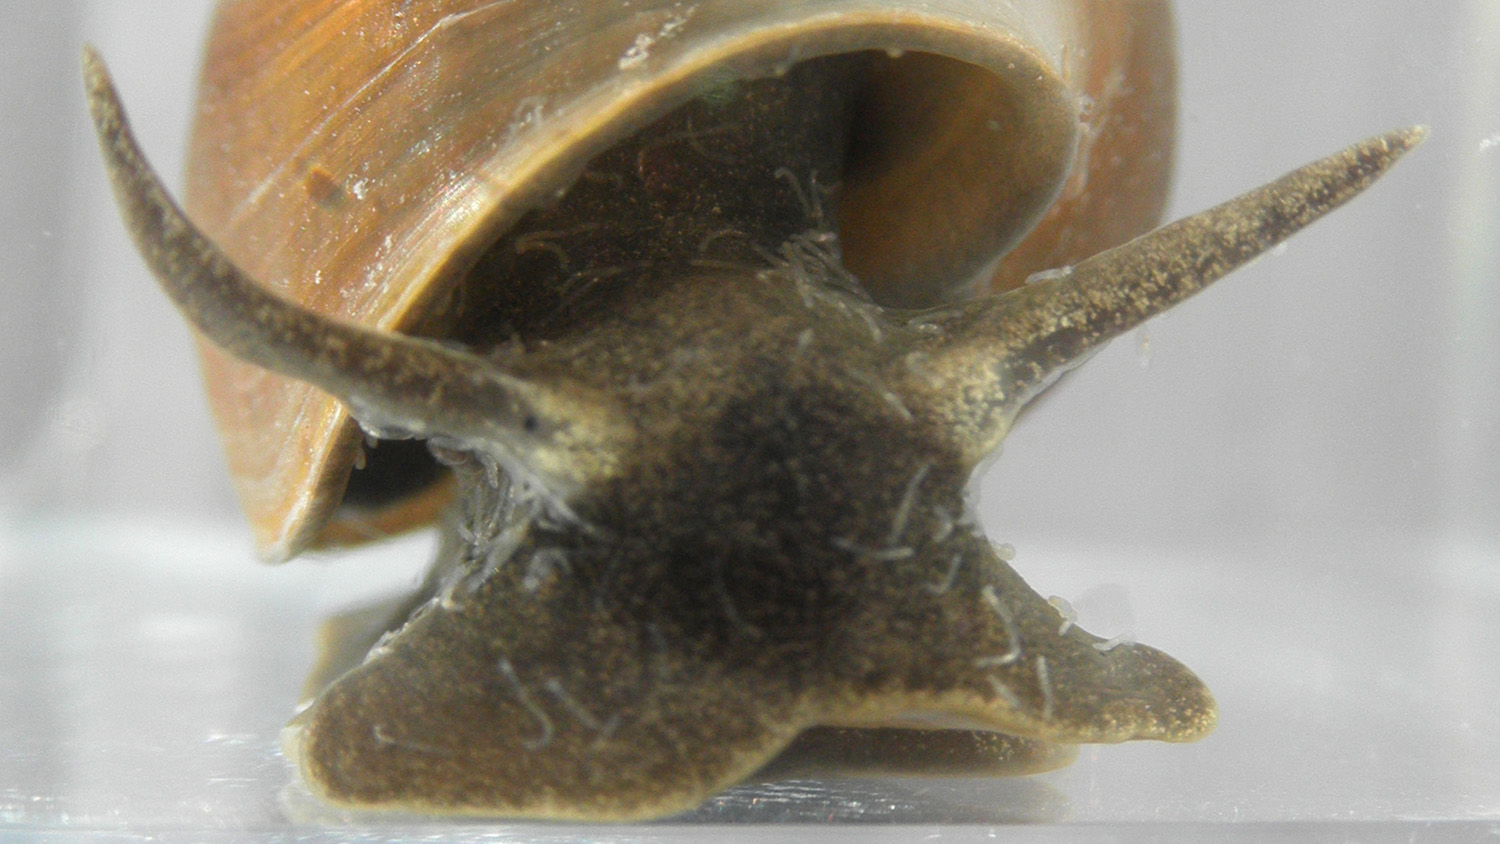 Parasitic worms on snail.